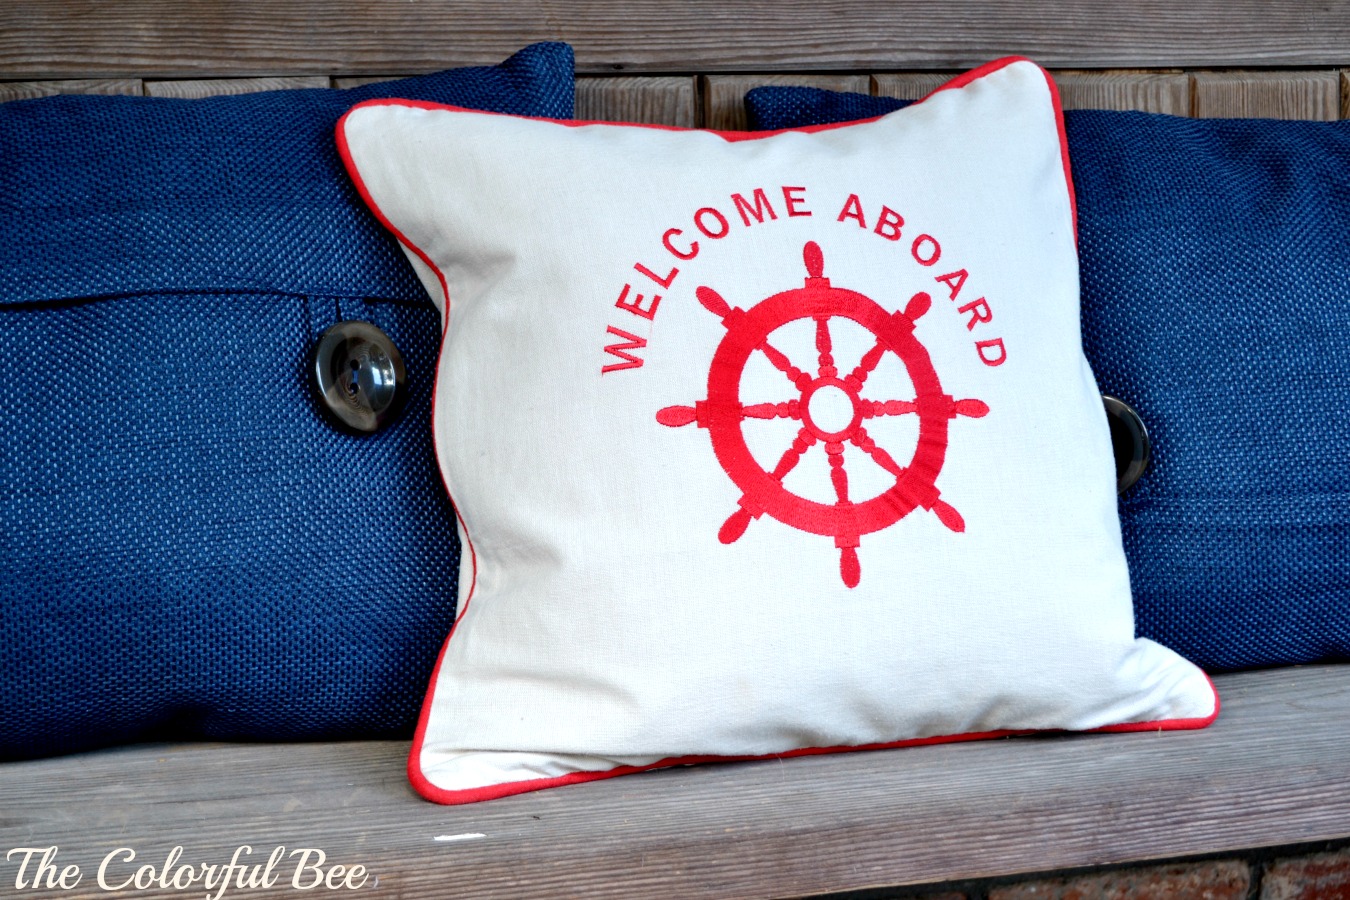 Welcome Aboard pillow and blue pillows for July Fourth celebration